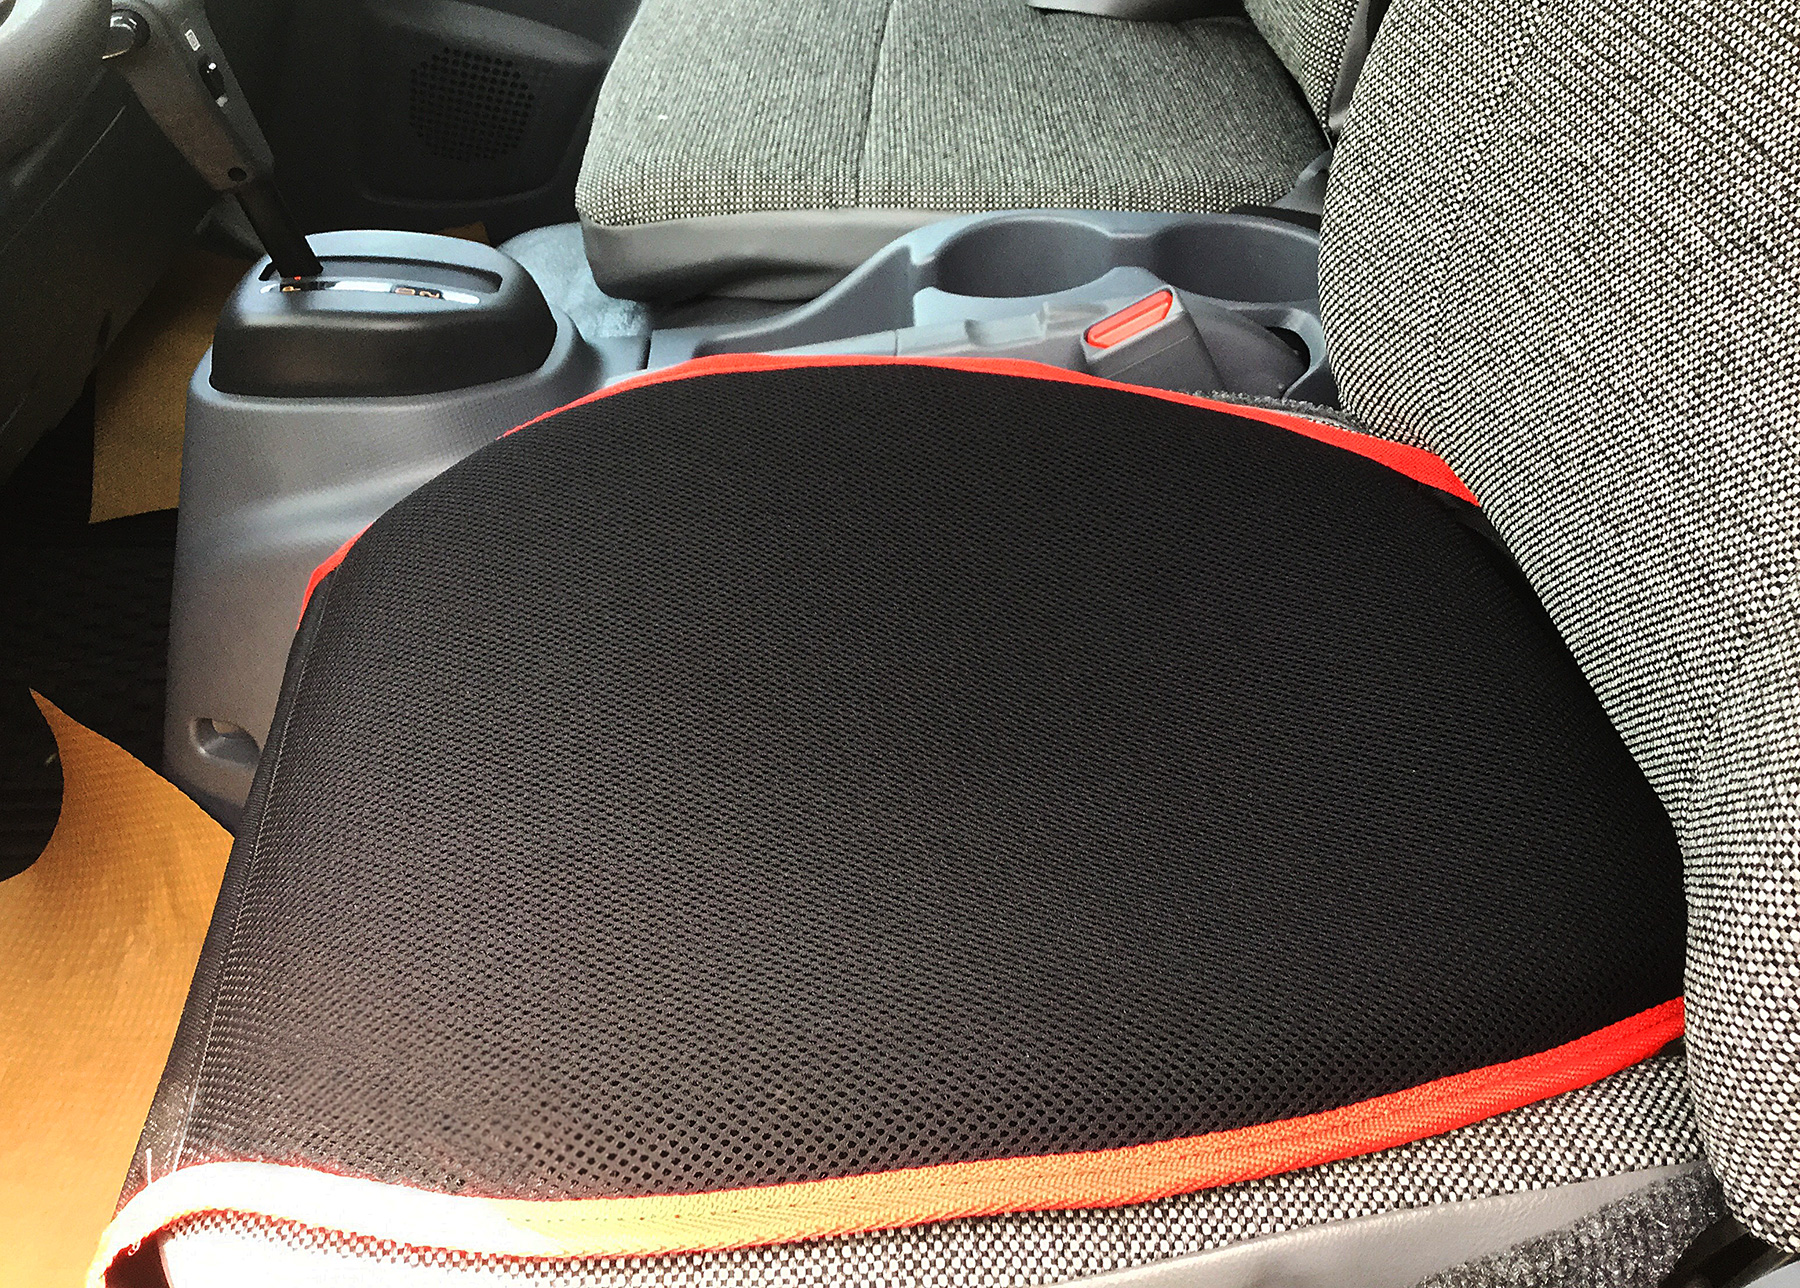 Semi-truck seat cushions provide advanced driver comfort and relief.